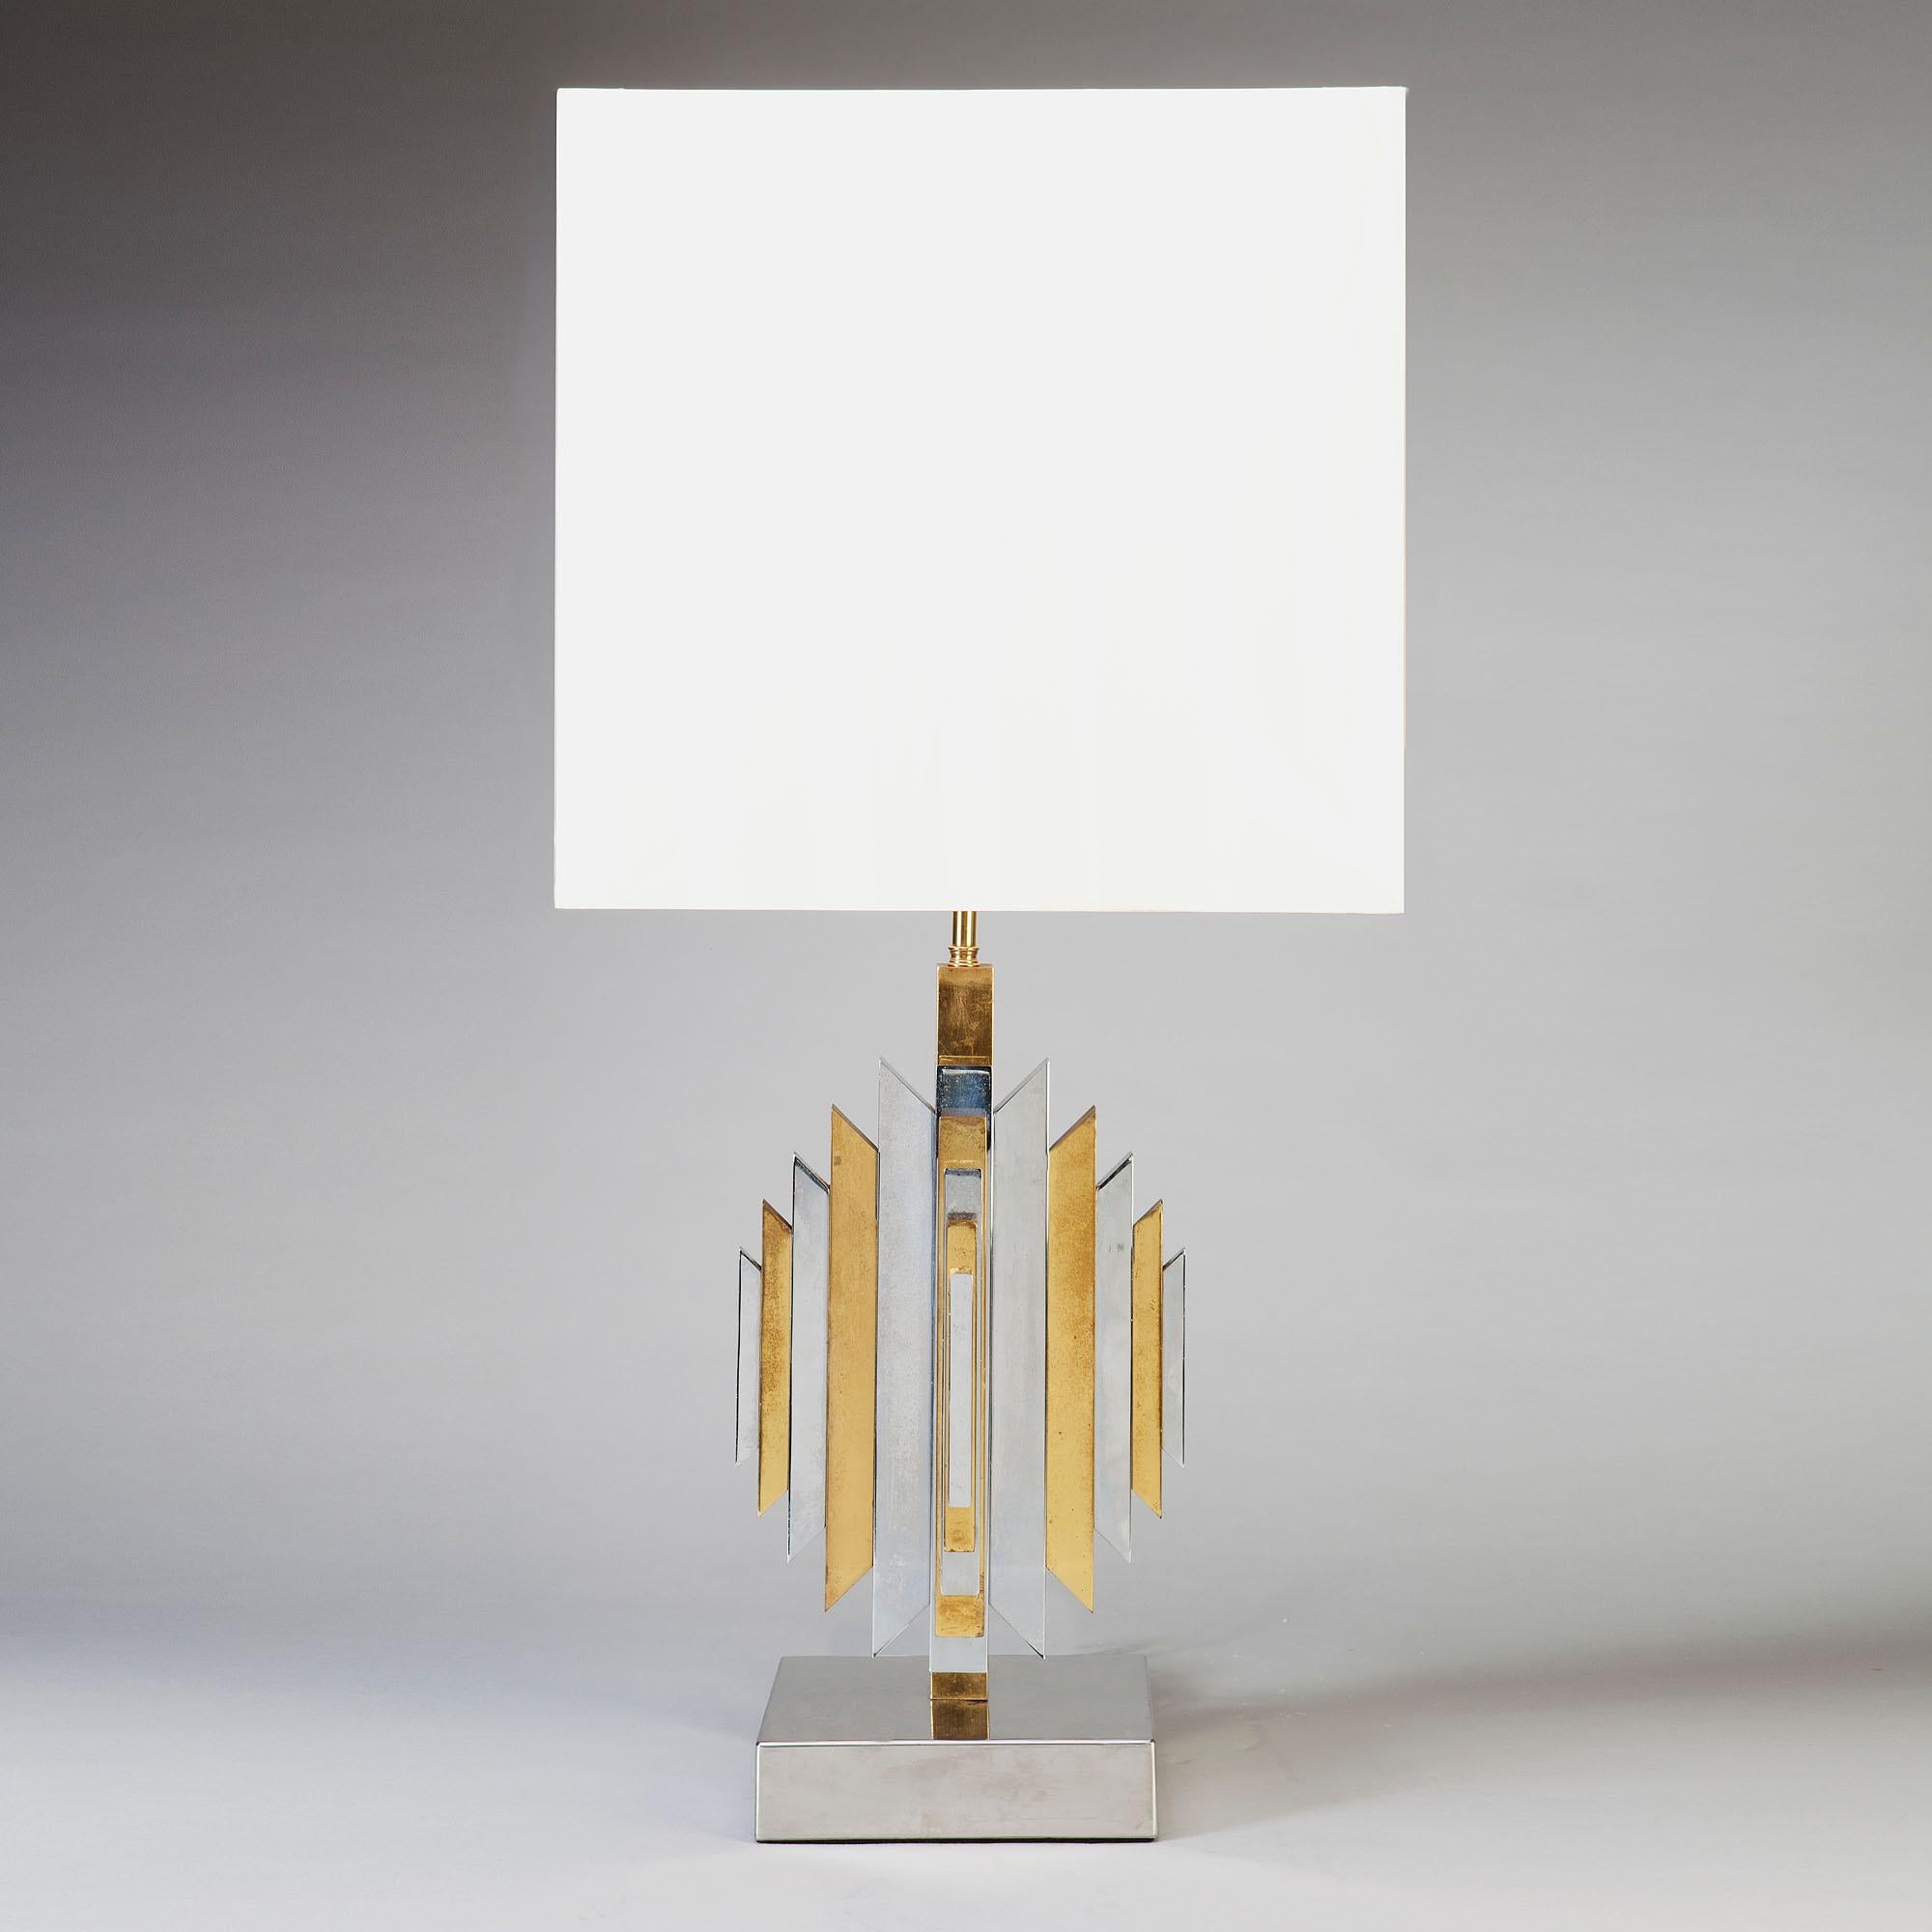 Brass Chrome Vintage Table Lamp, attributed to Romeo Rega Italy, circa 1975

Romeo Rega style vintage table lamp in brass and chrome. Each face is decorated with chamfered end ascending length alternating panels of brass and chrome.

Additional